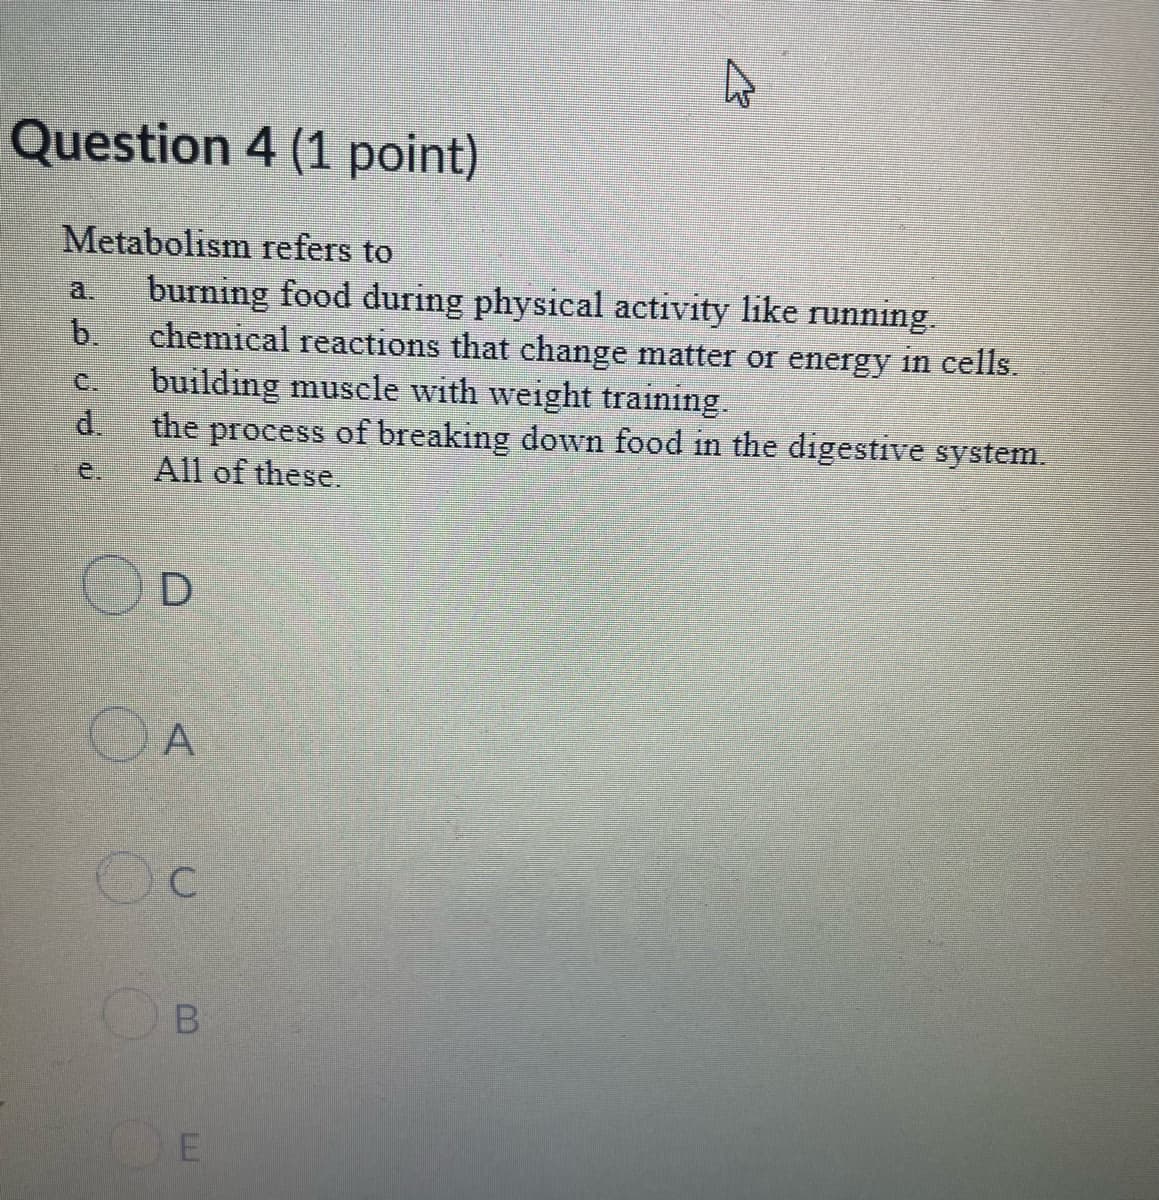 Question 4 (1 point)
Metabolism refers to
burning food during physical activity like running.
b.
a.
chemical reactions that change matter or energy in cells.
building muscle with weight training.
d.
C.
the process of breaking down food in the digestive system.
All of these.
e.
C.
